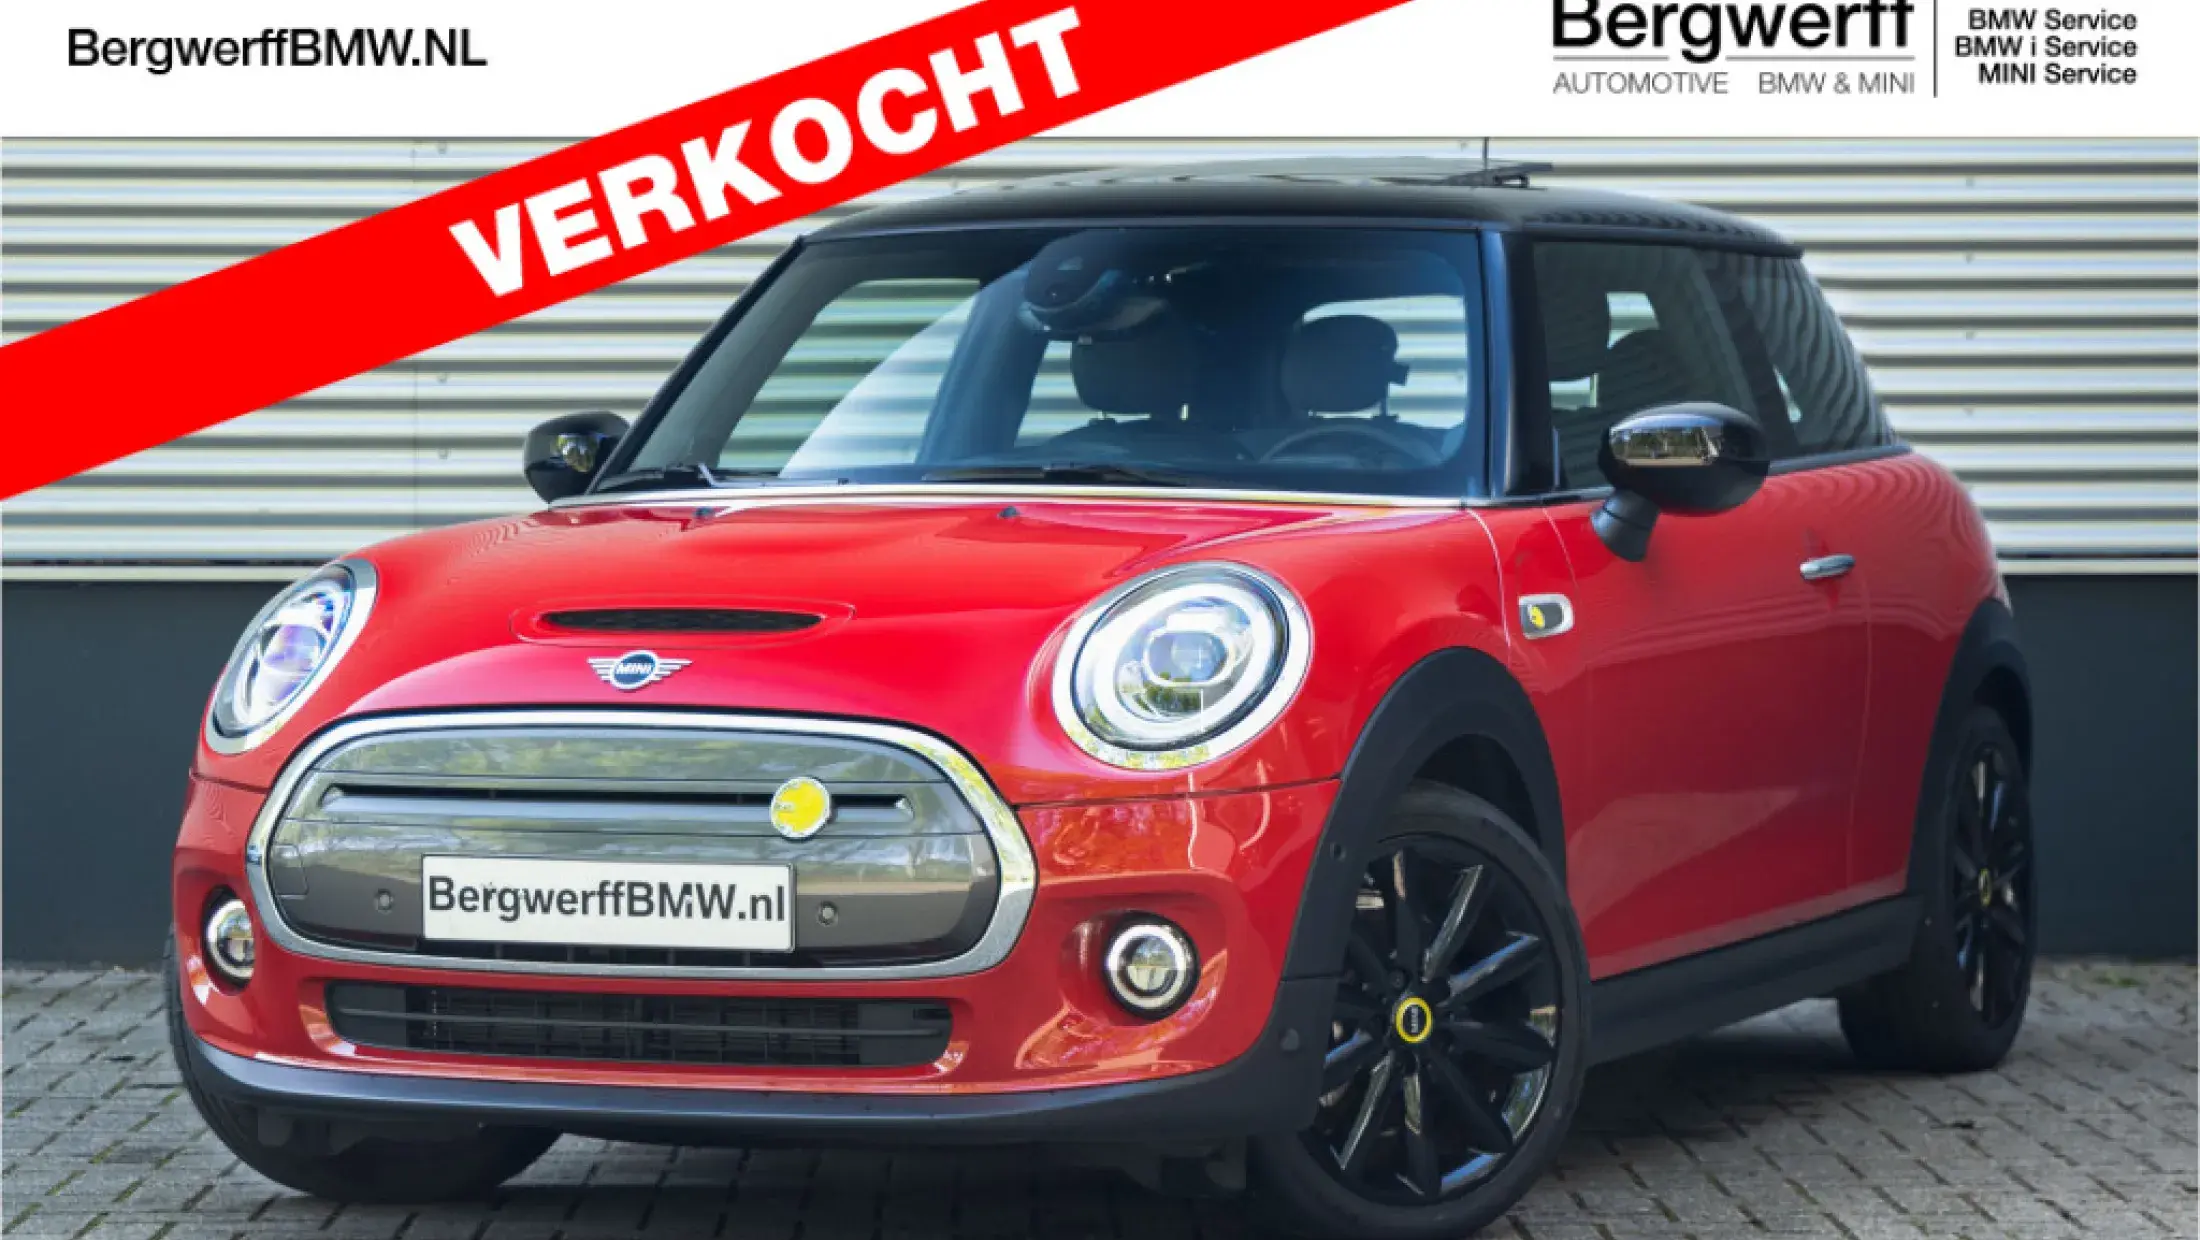 MINI Electric Yours Chili red Yours leer lounge carbon black F57 Cooper SE Bergwerff